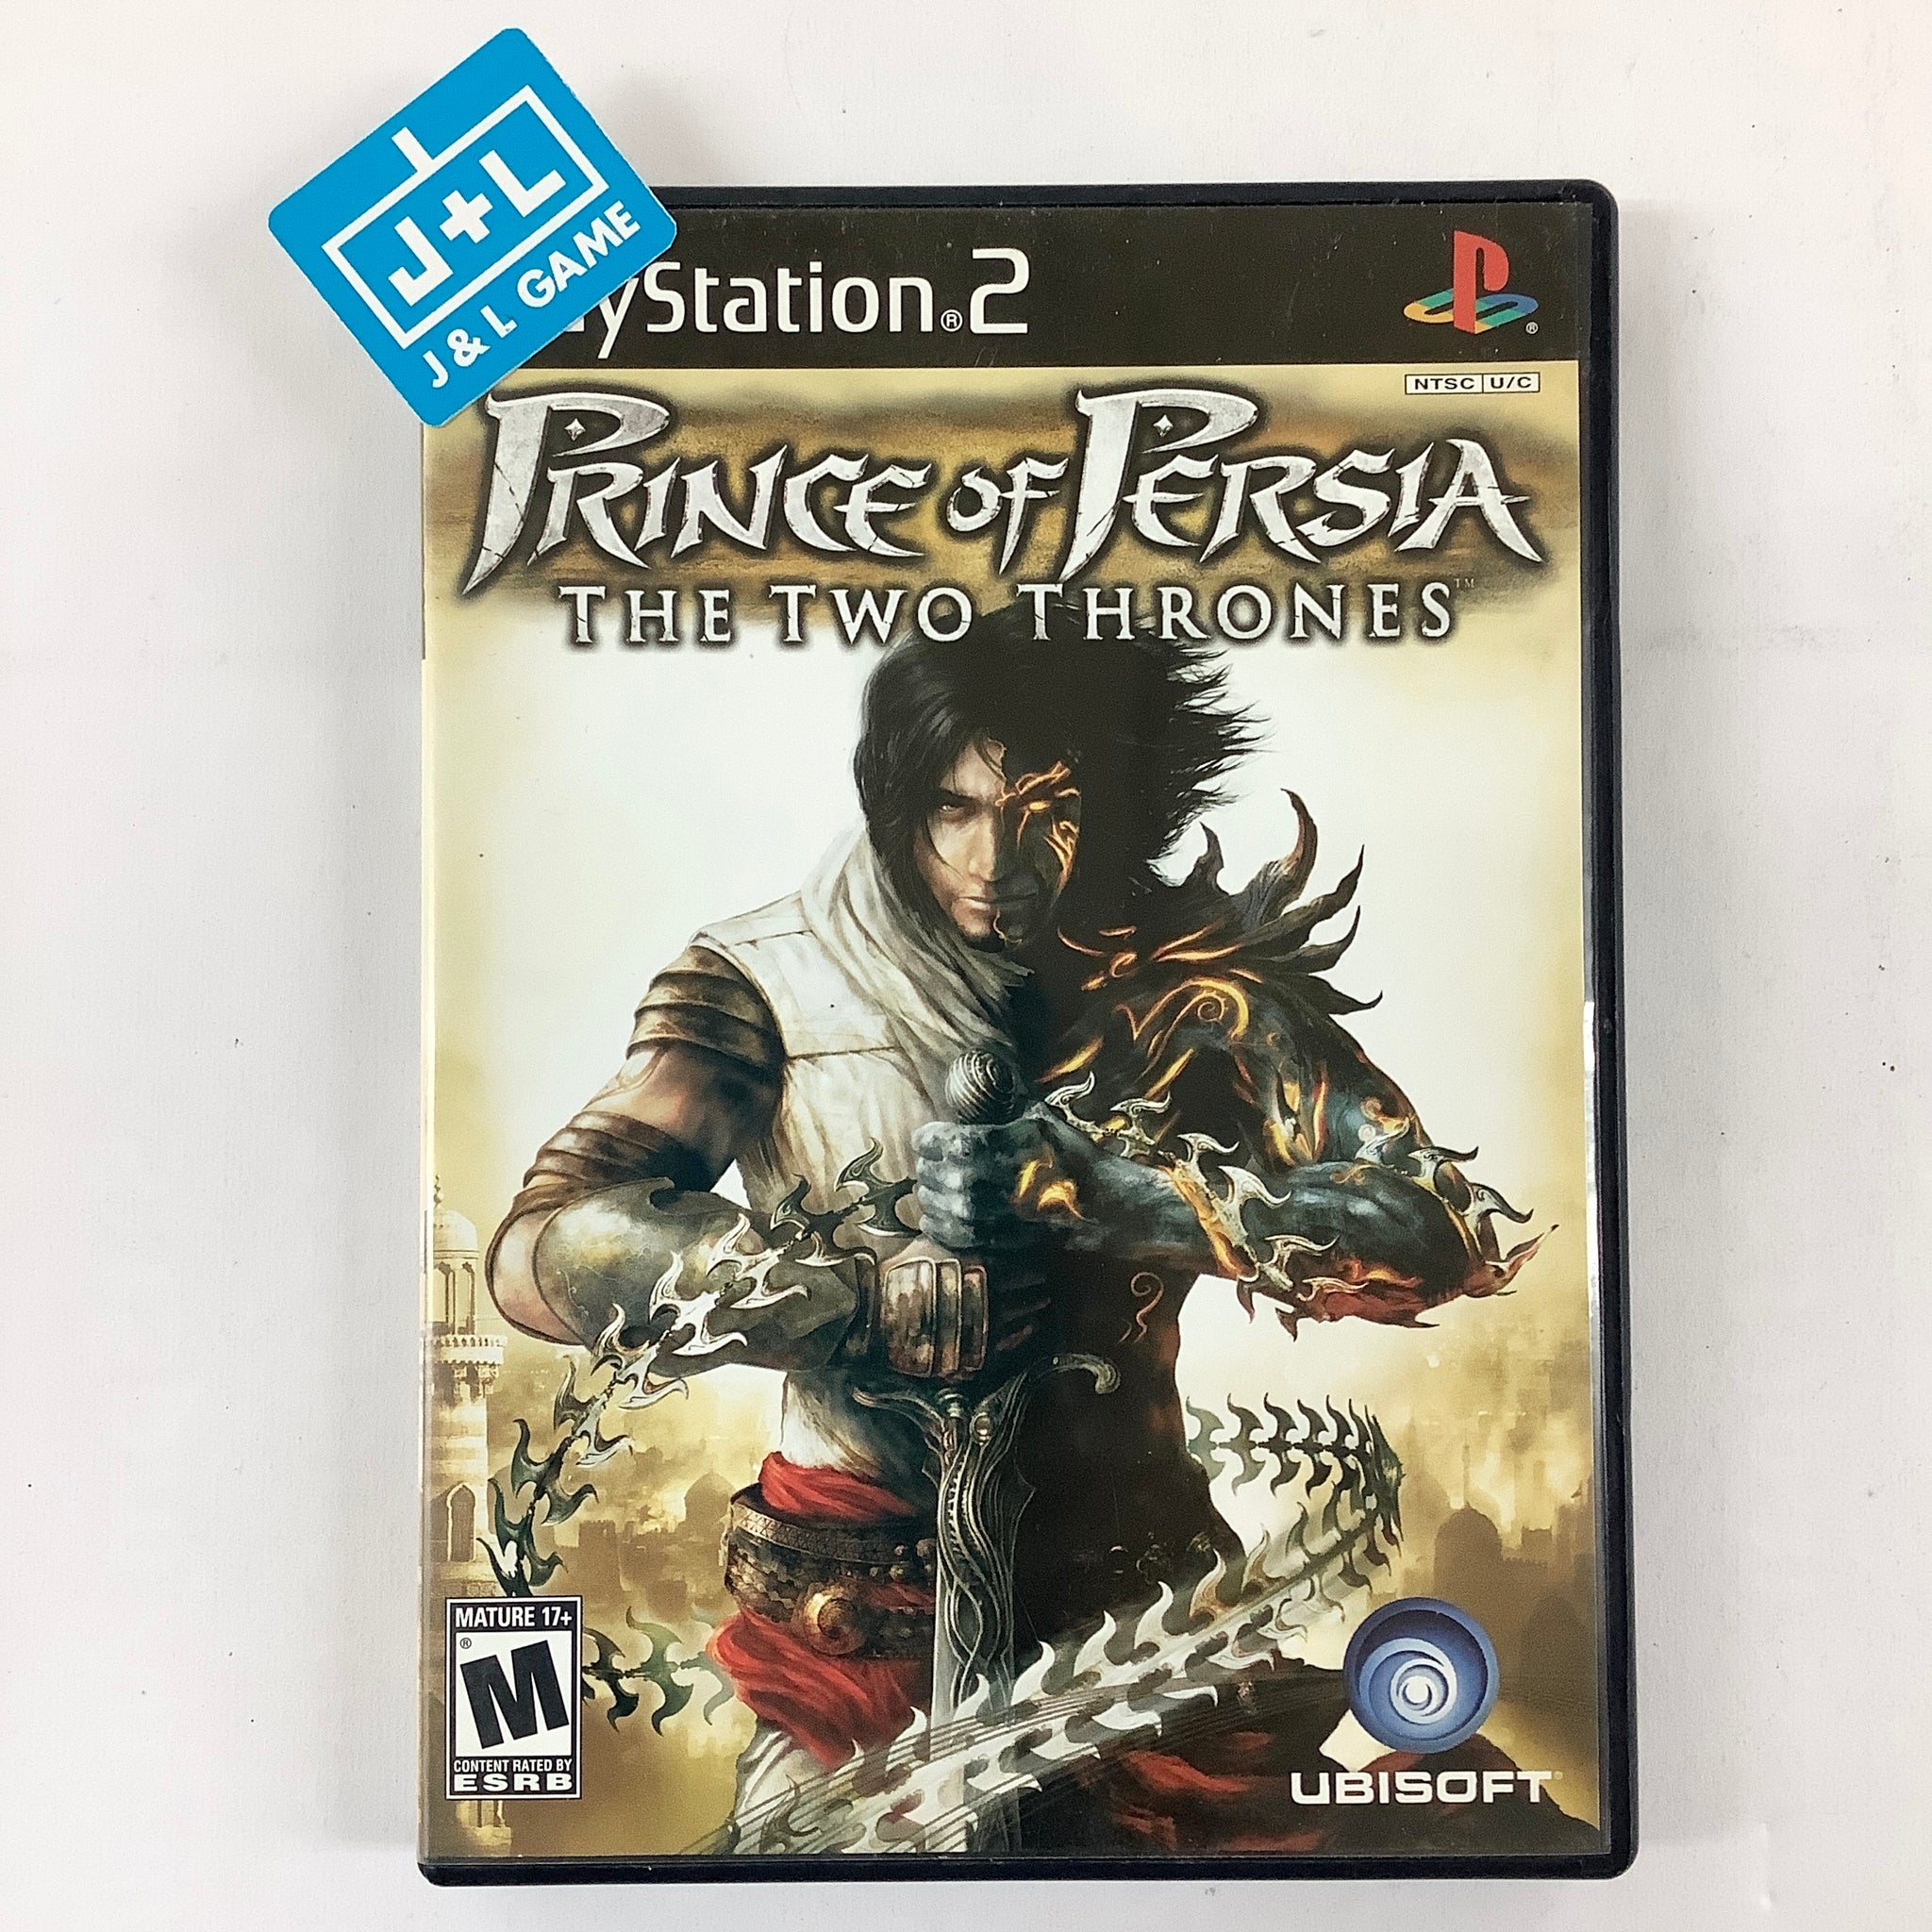 Prince of Persia: The Sands of Time (Greatest Hits) for PlayStation 2